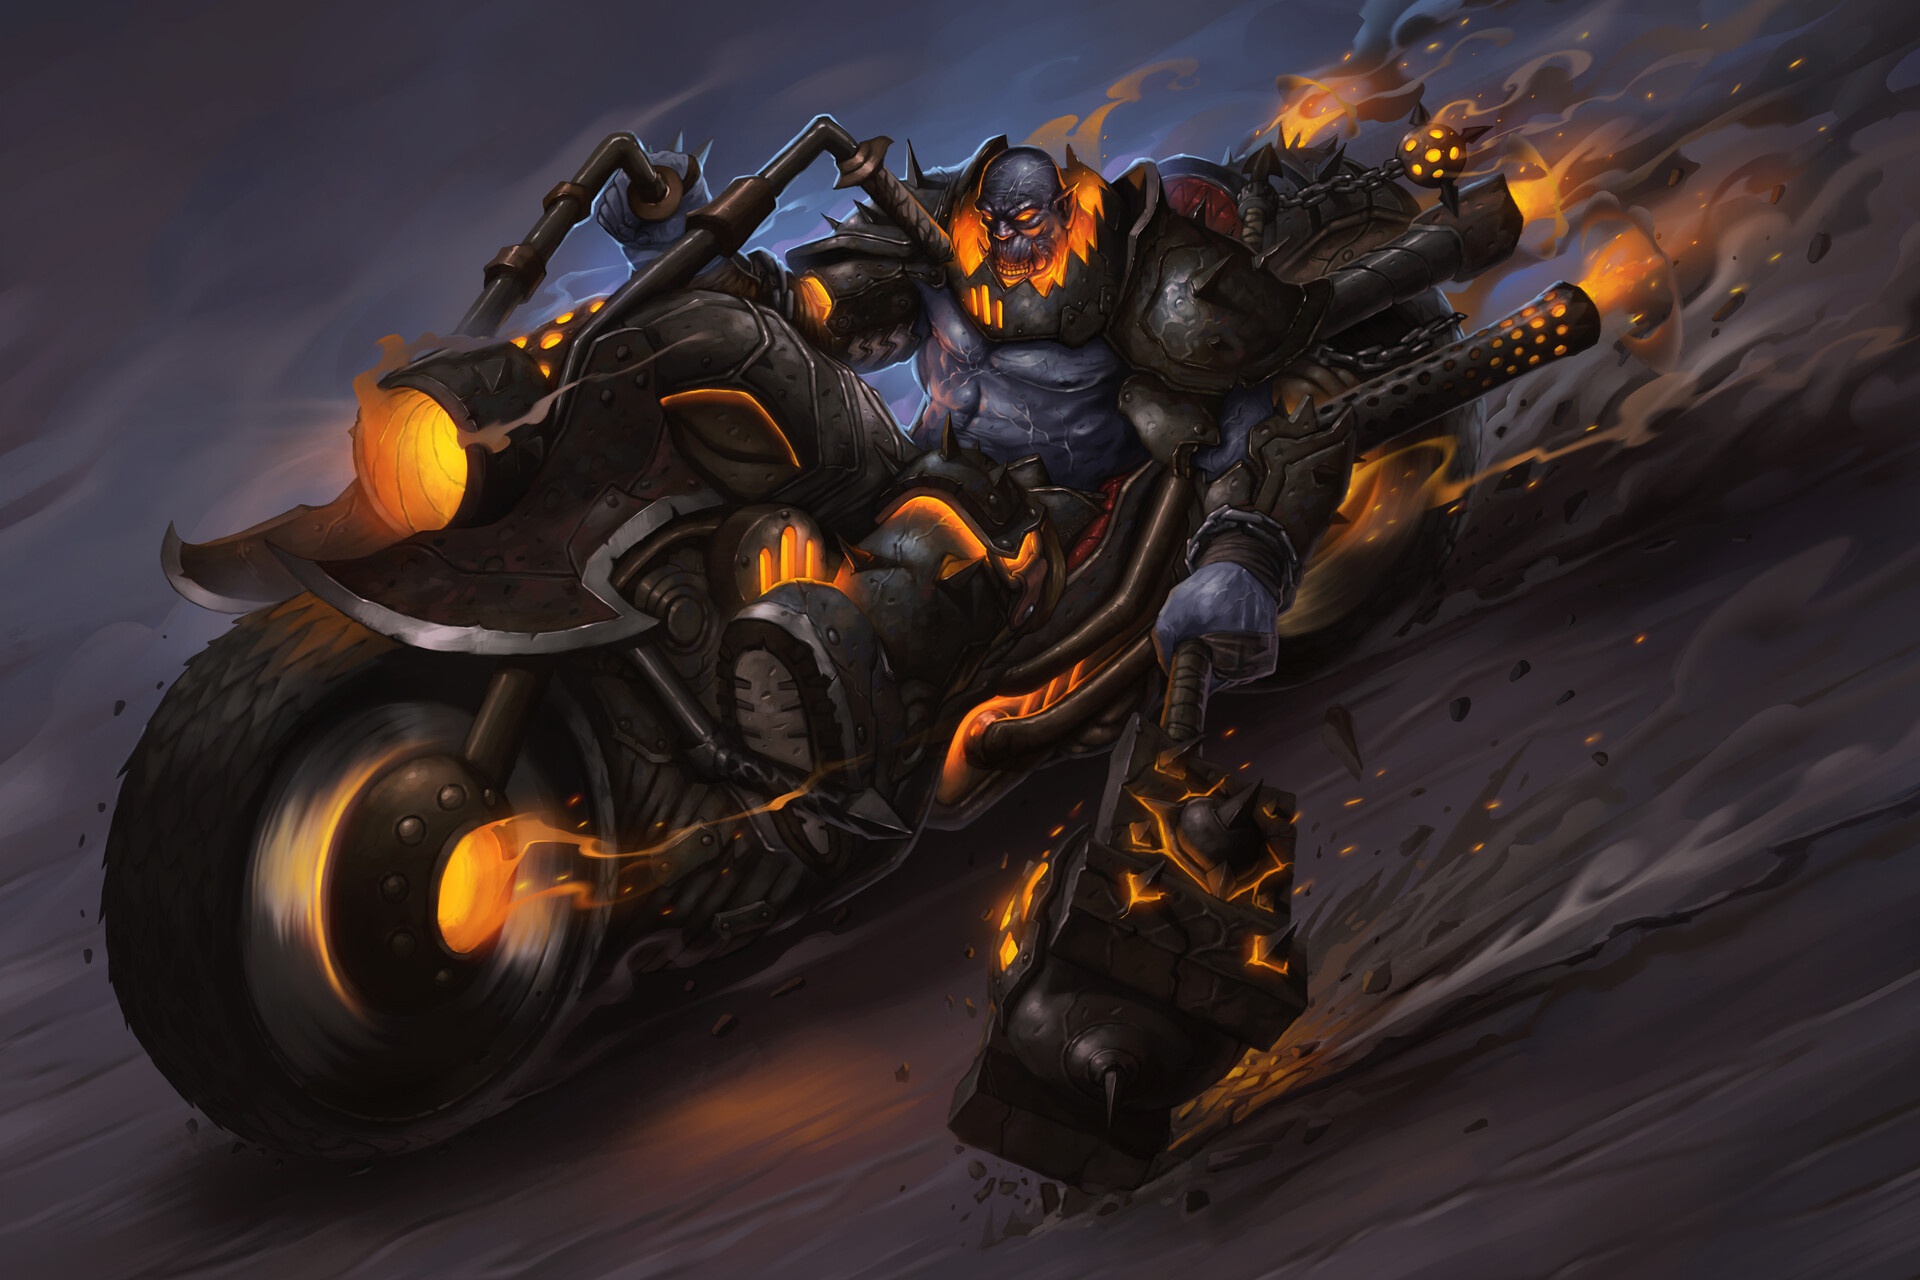 Wallpaper Of Hammer, Motorcycle, Orc, Fantasy Background - World Of Warcraft Black Hand - HD Wallpaper 